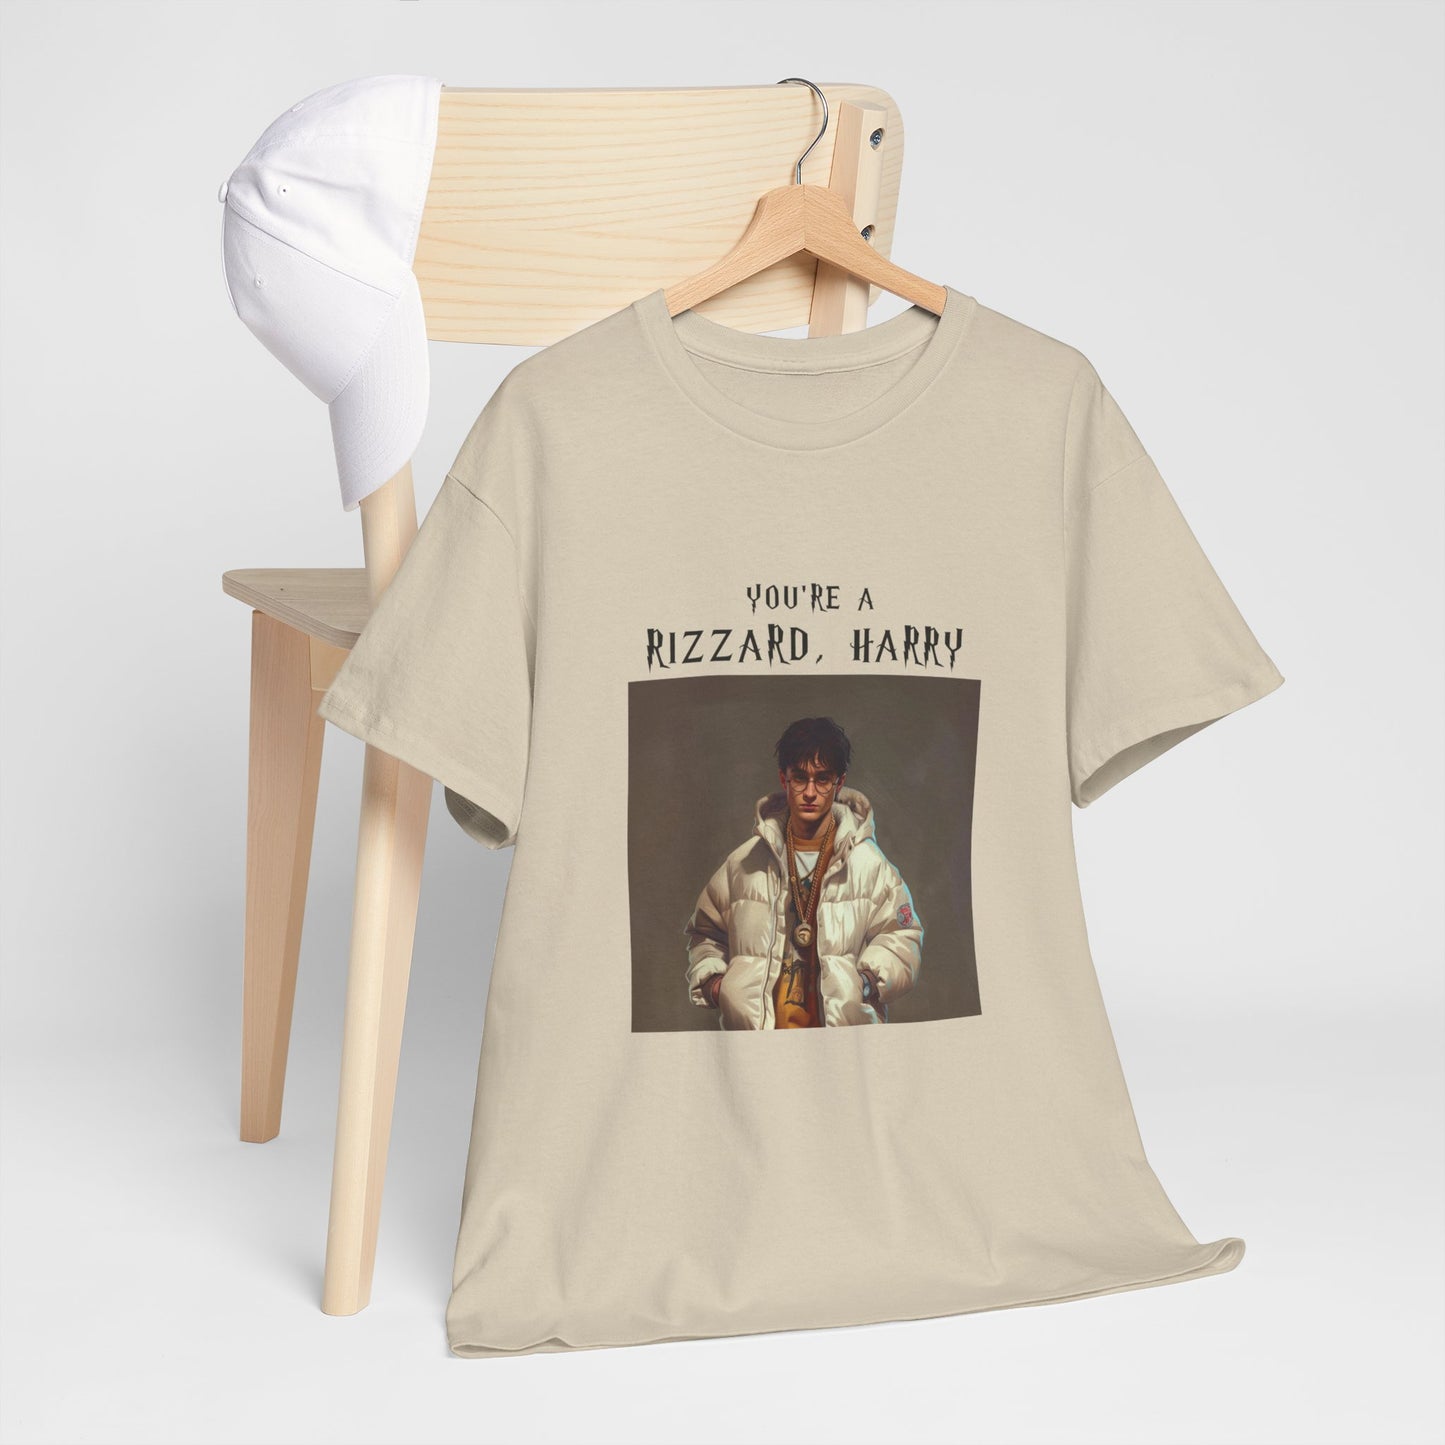 YOU'RE A RIZZARD HARRY - Tee